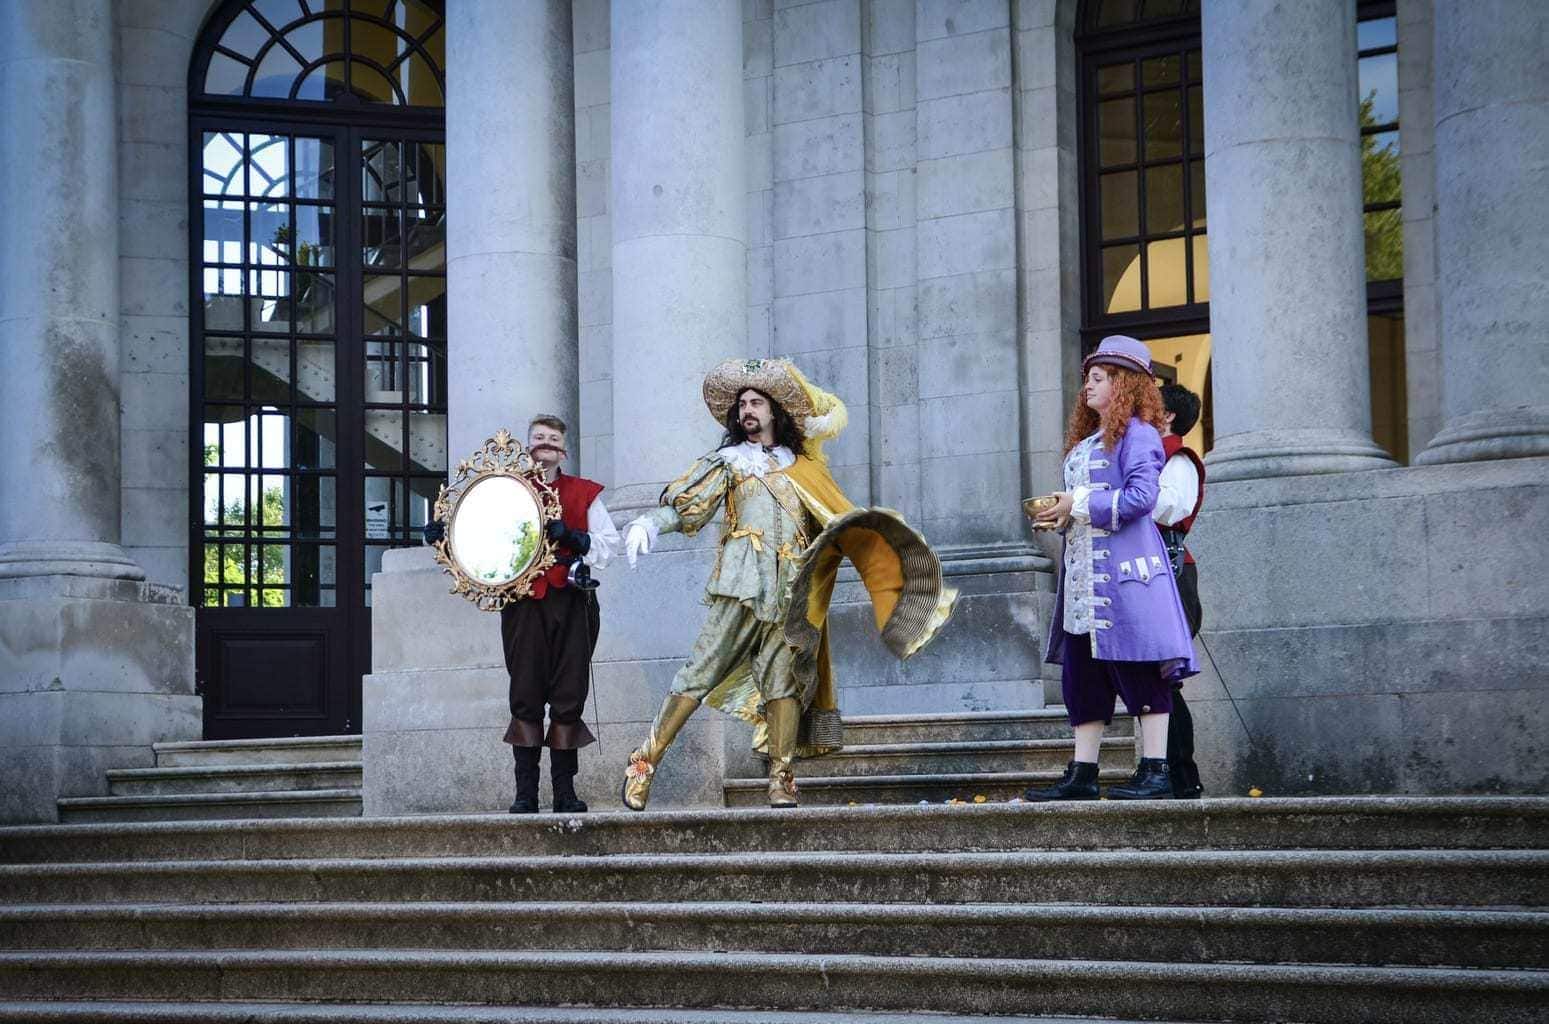 The Three Musketeers Walkabout Theatre | The Dukes Play at Williamson Park